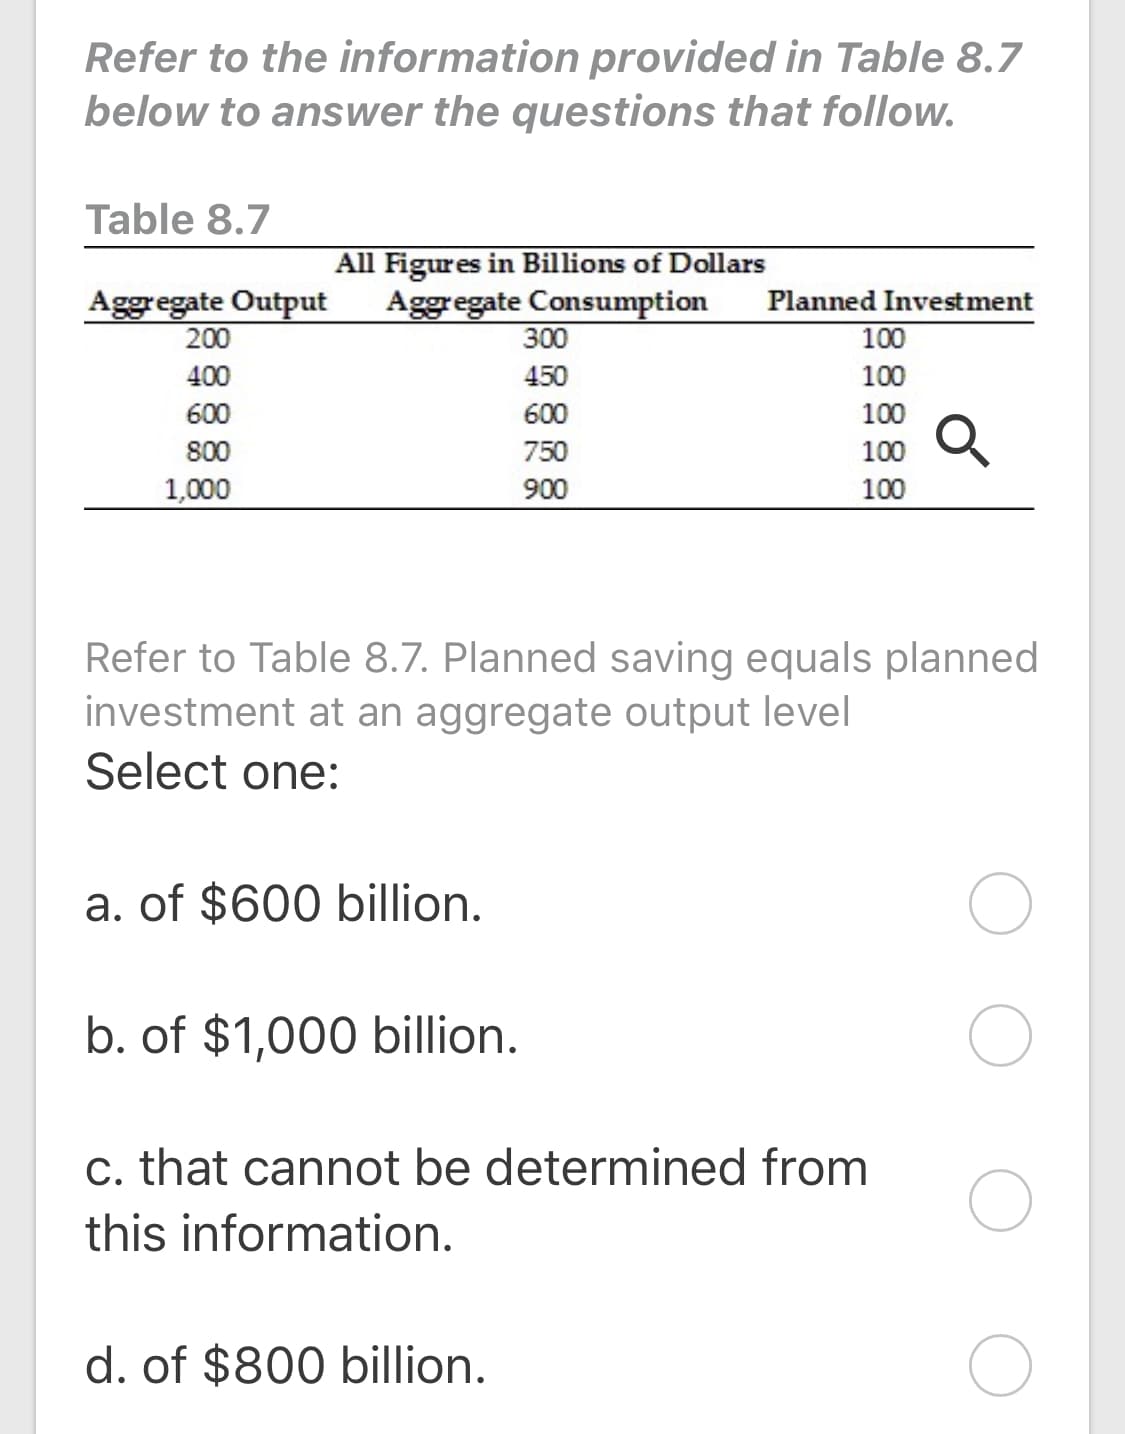 Refer to Table 8.7. Planned saving equals planned
investment at an aggregate output level
